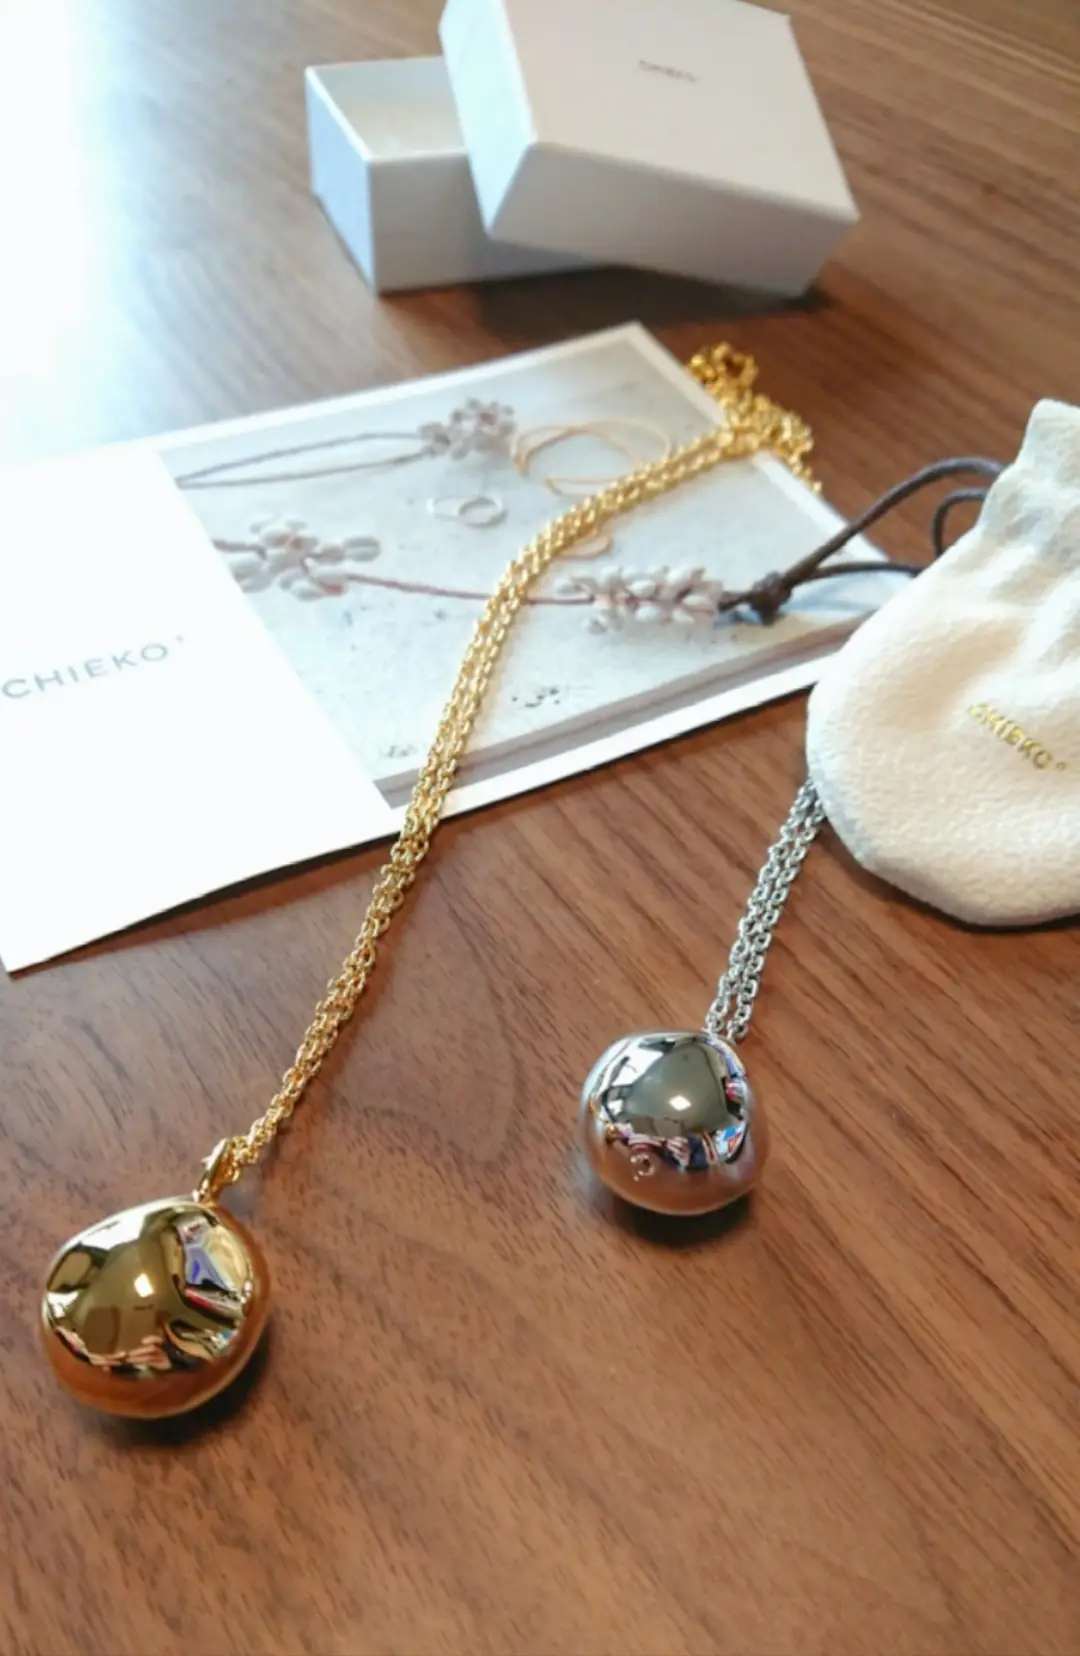 chieko+   big chain necklaceビッグチェーンネックレス